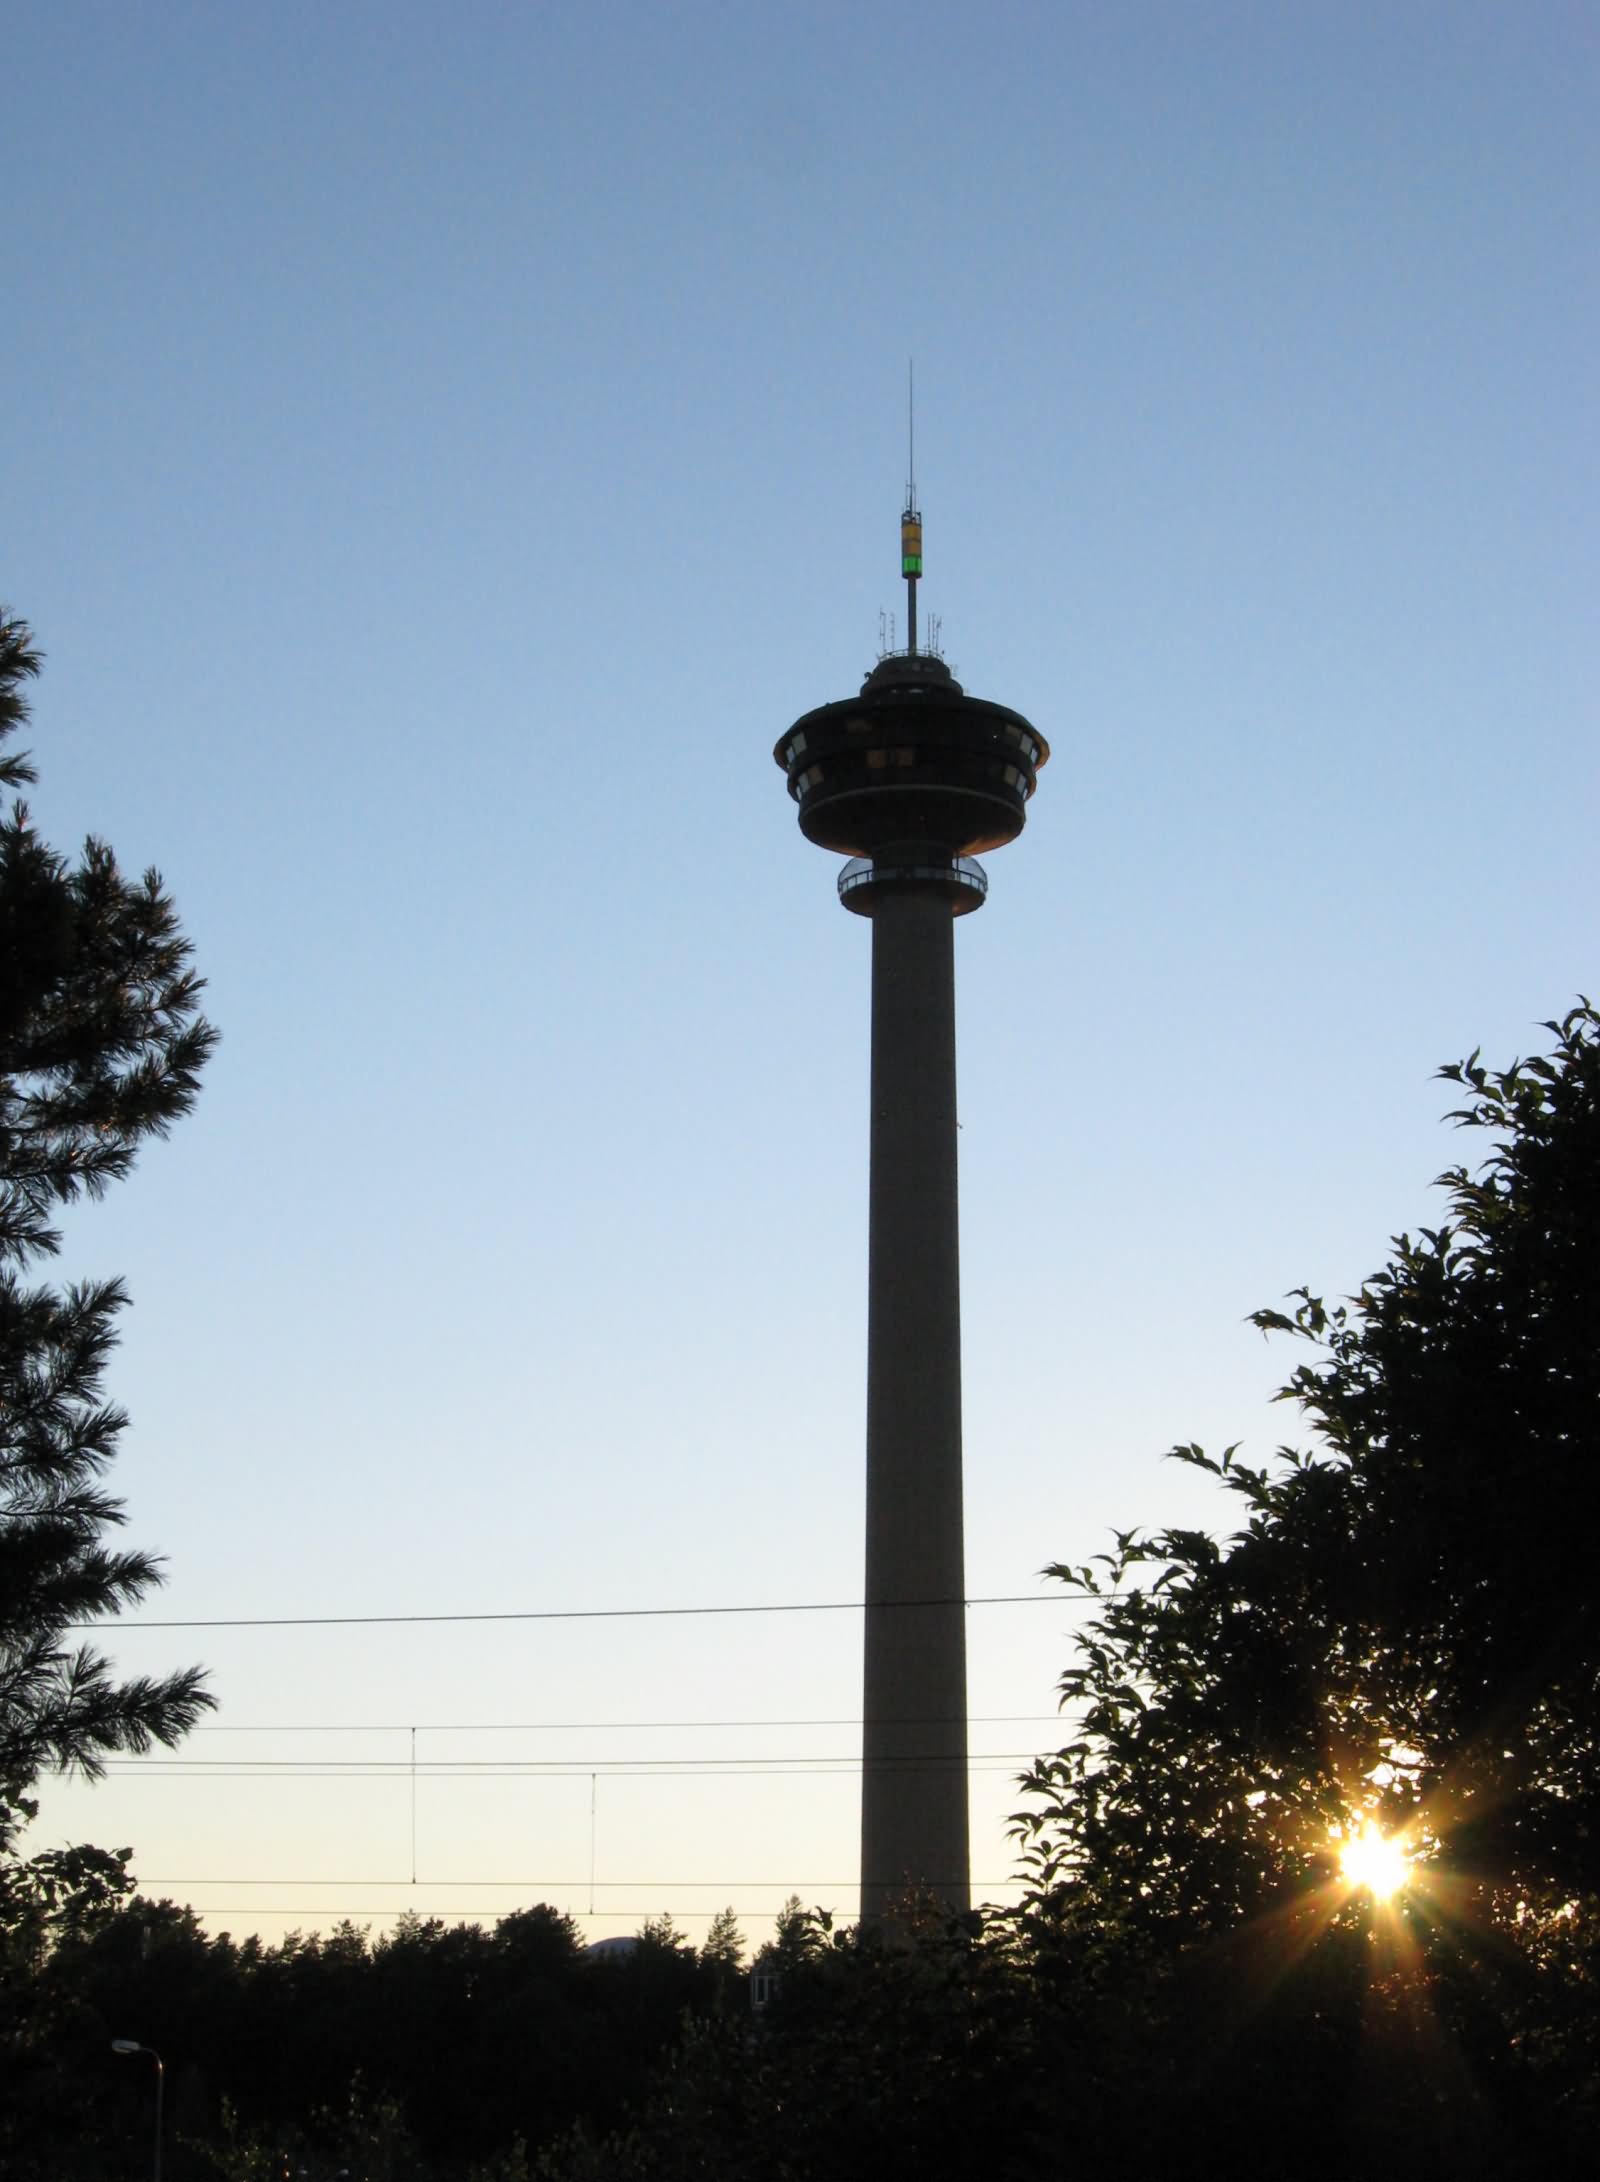 The Nasinneula Tower During Evening